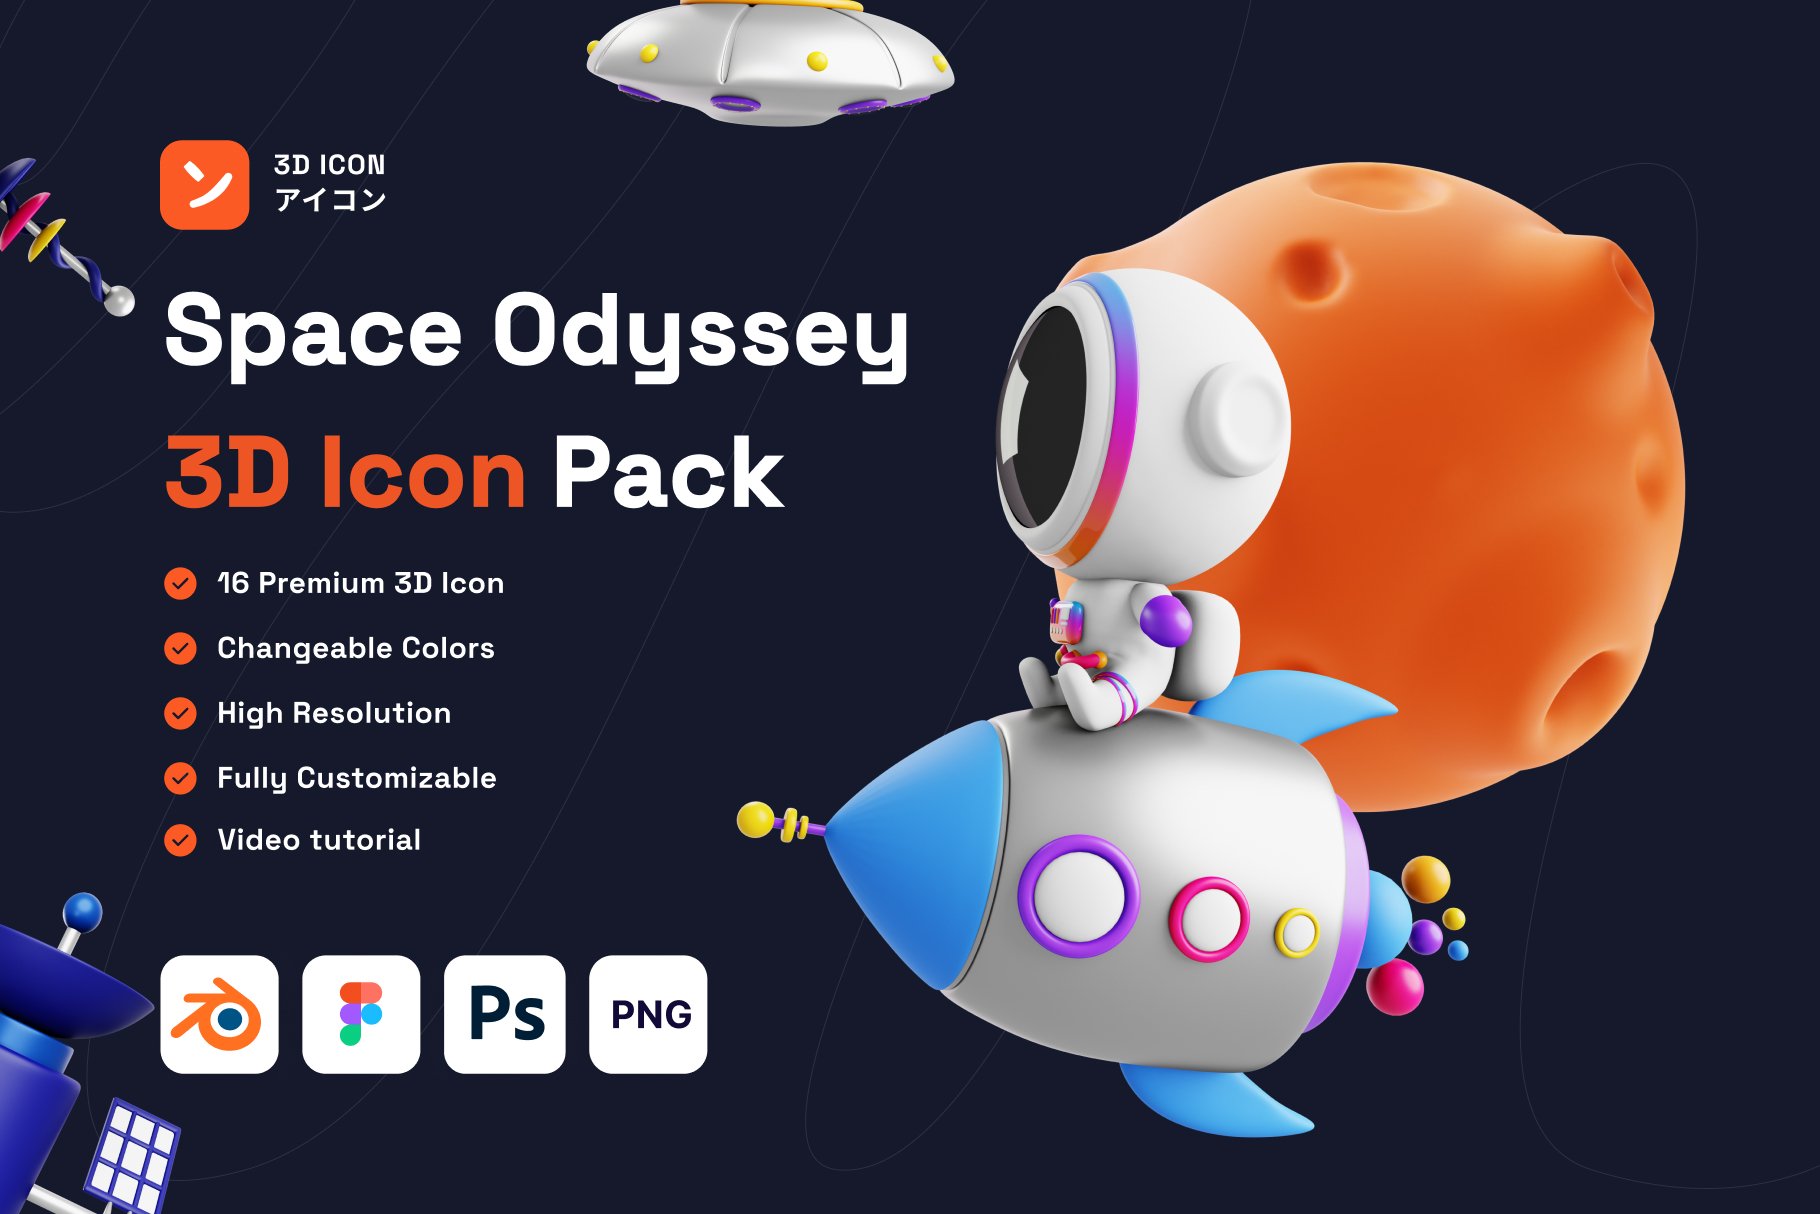 Space Odyssey 3D Icon Pack cover image.